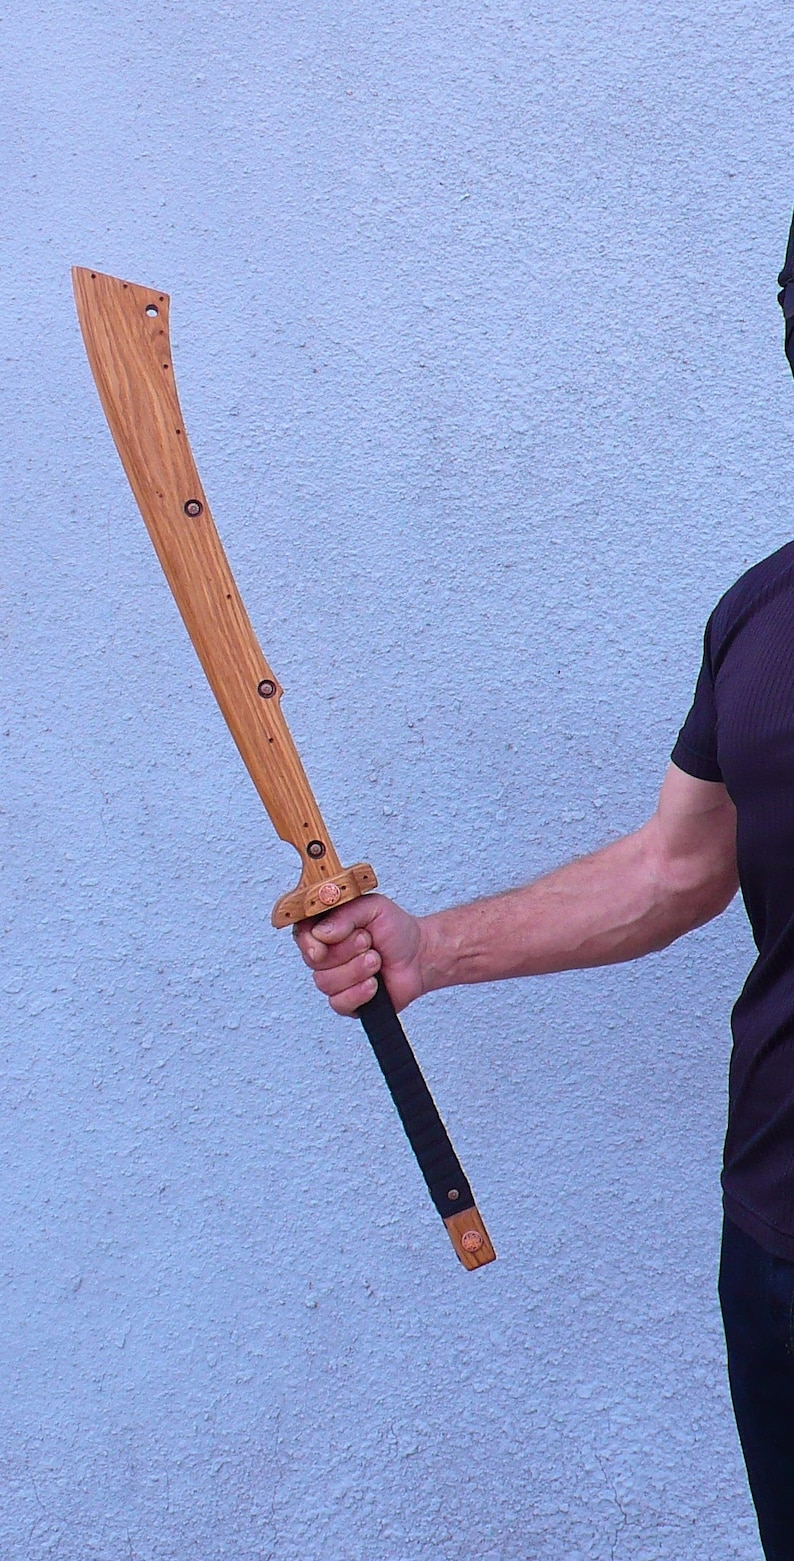 Wooden Sword 35 43 Handmade Weapon Hand Crafted Etsy